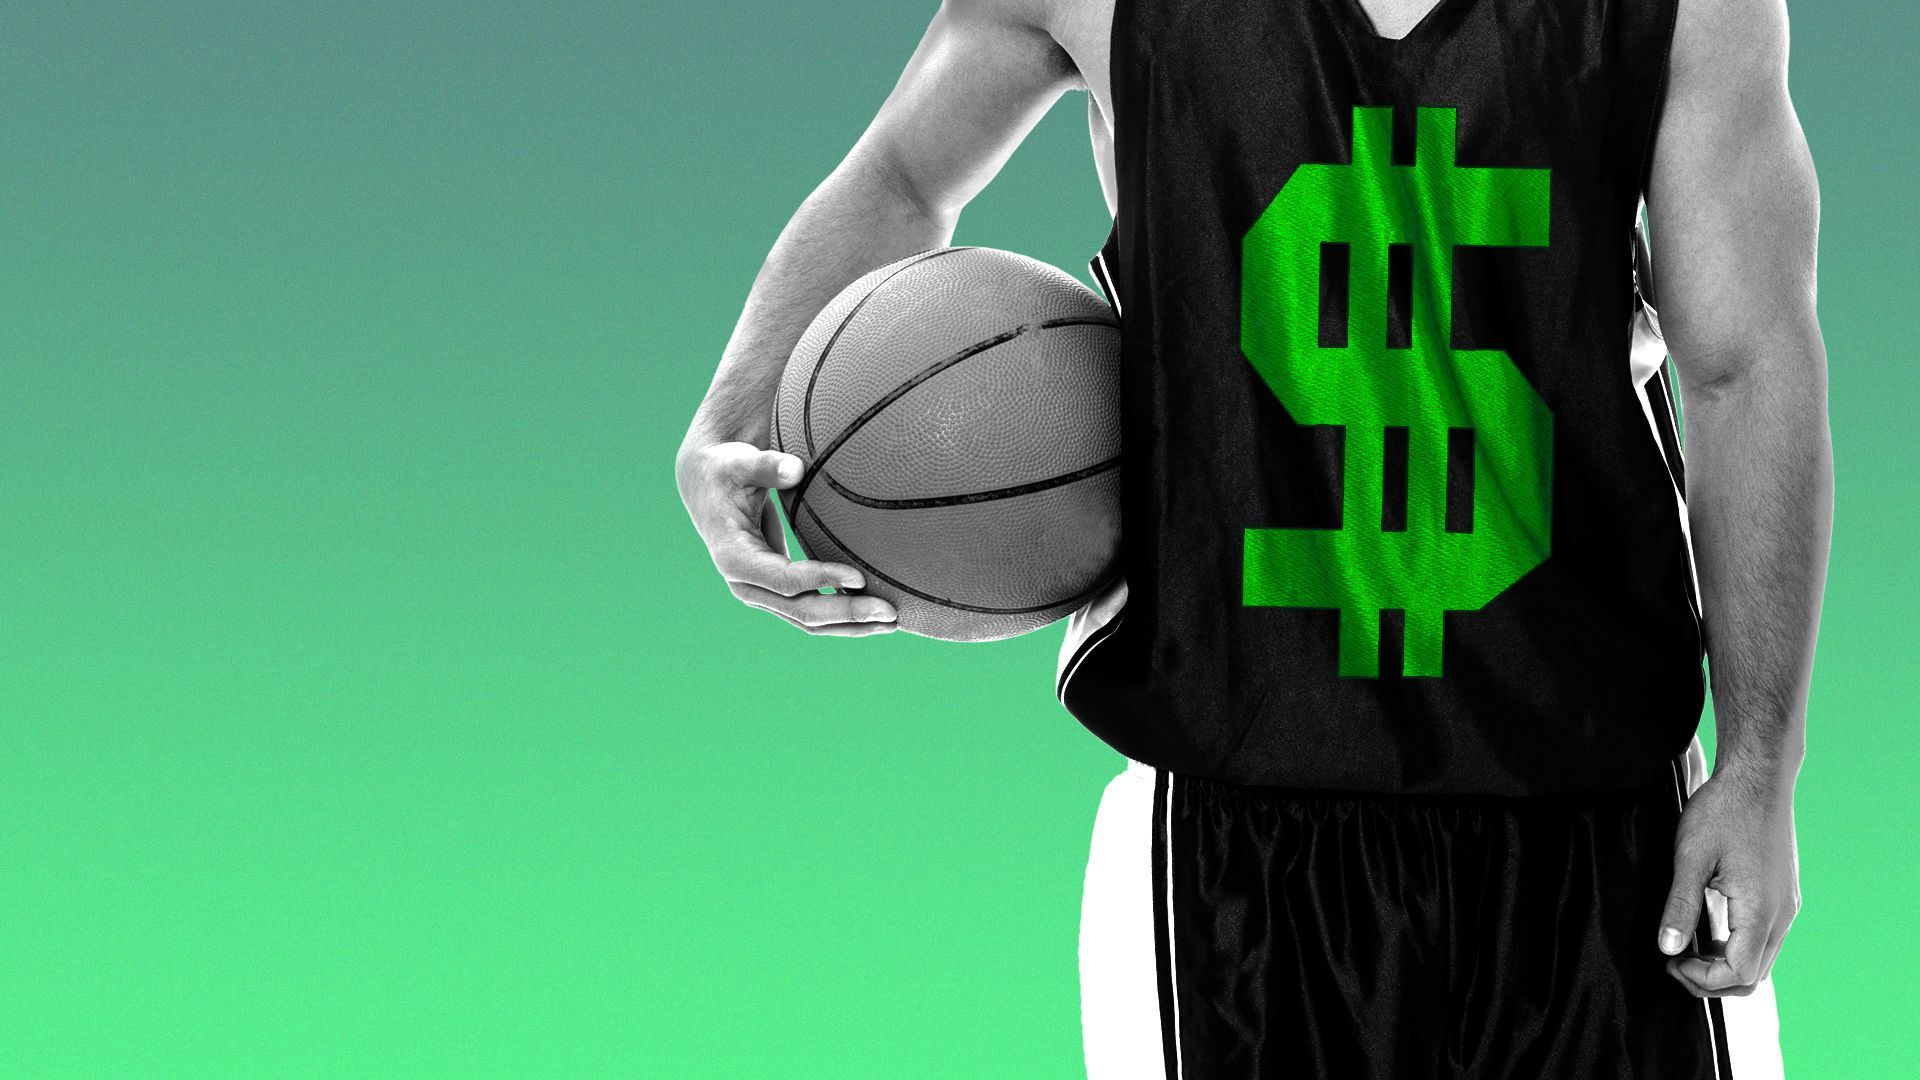 Illustration of a college basketball player with a dollar sign on his jersey.